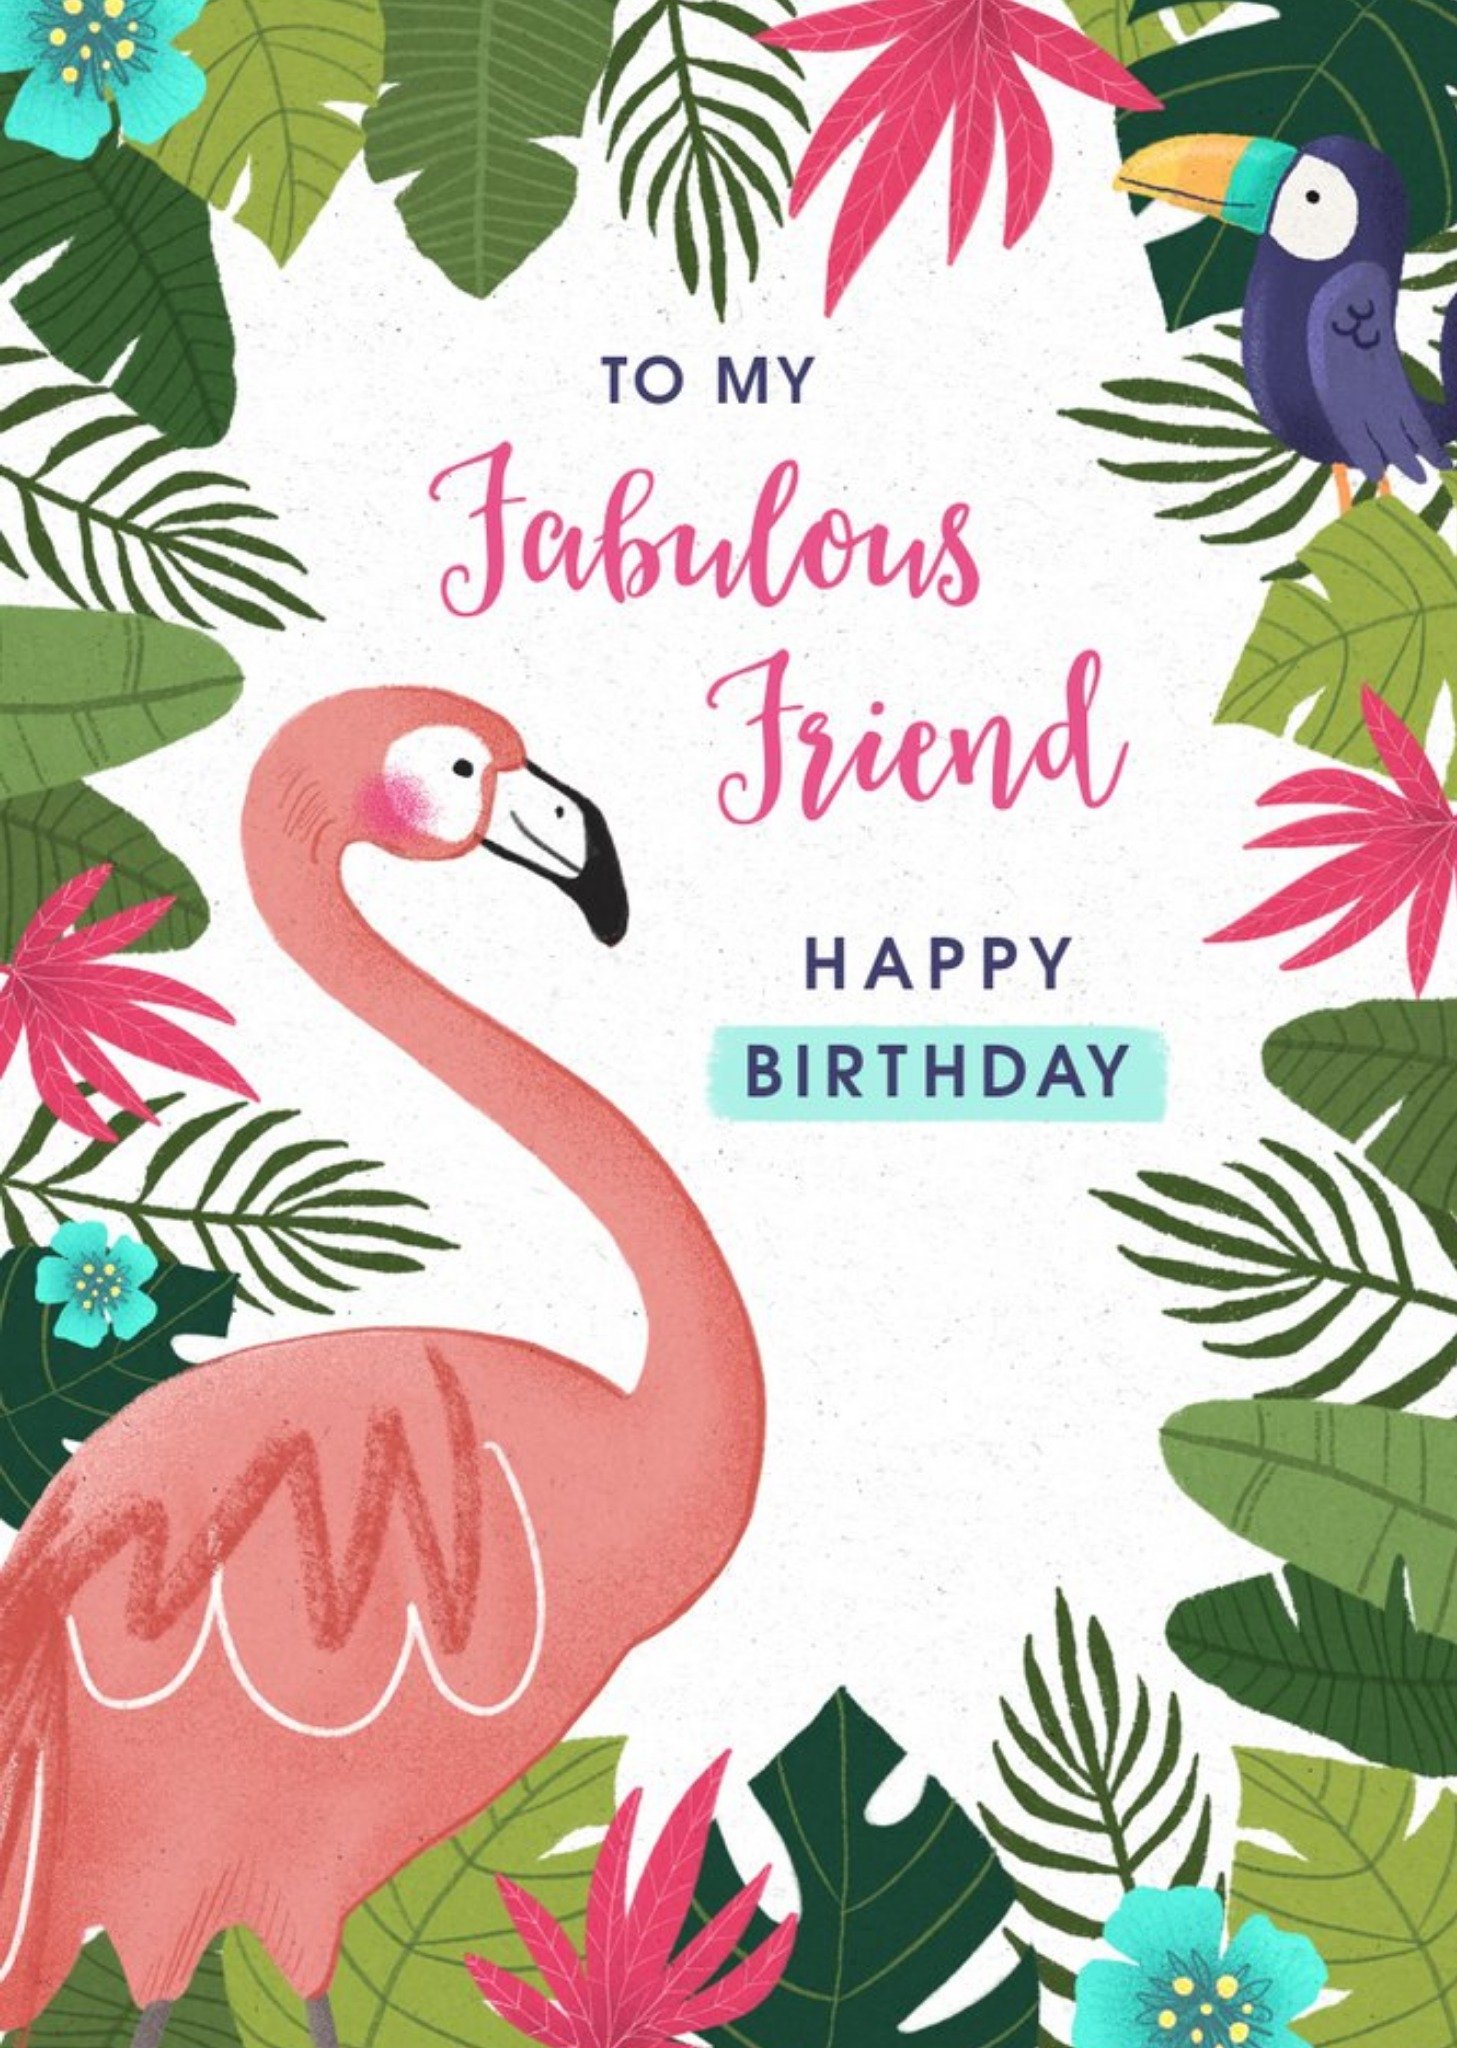 Moonpig Flamingo Celebrating A Birthday Framed By A Floral Frame My Fabulous Friend Card, Large